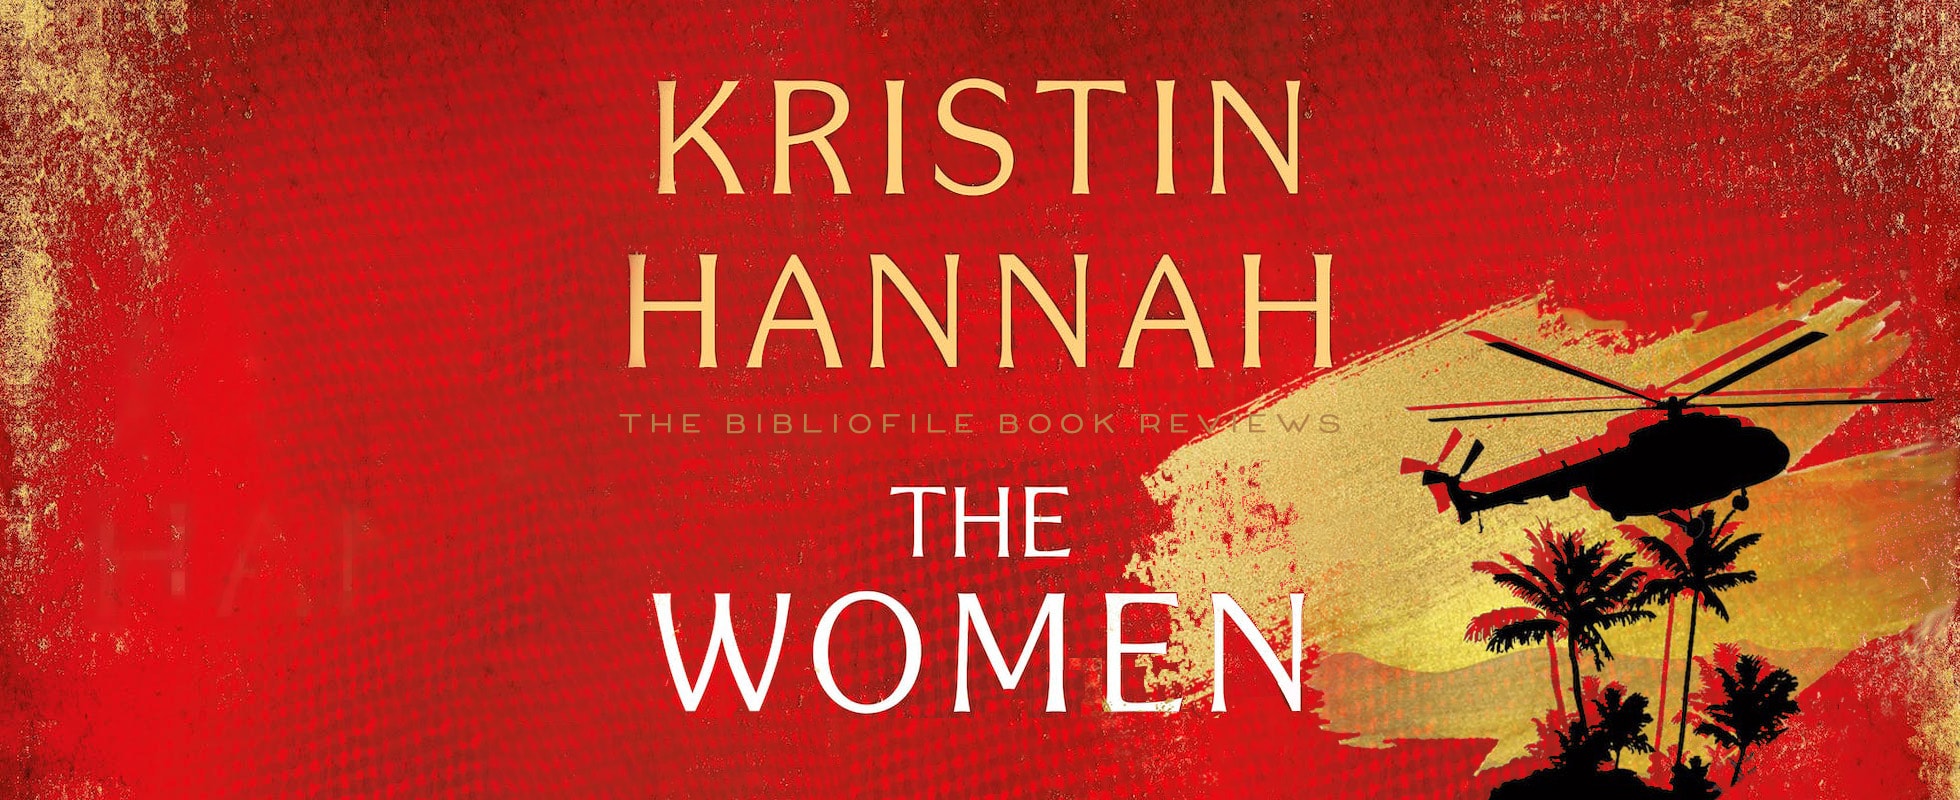 the women by kristin hannah book review plot summary synopsis spoilers discussion